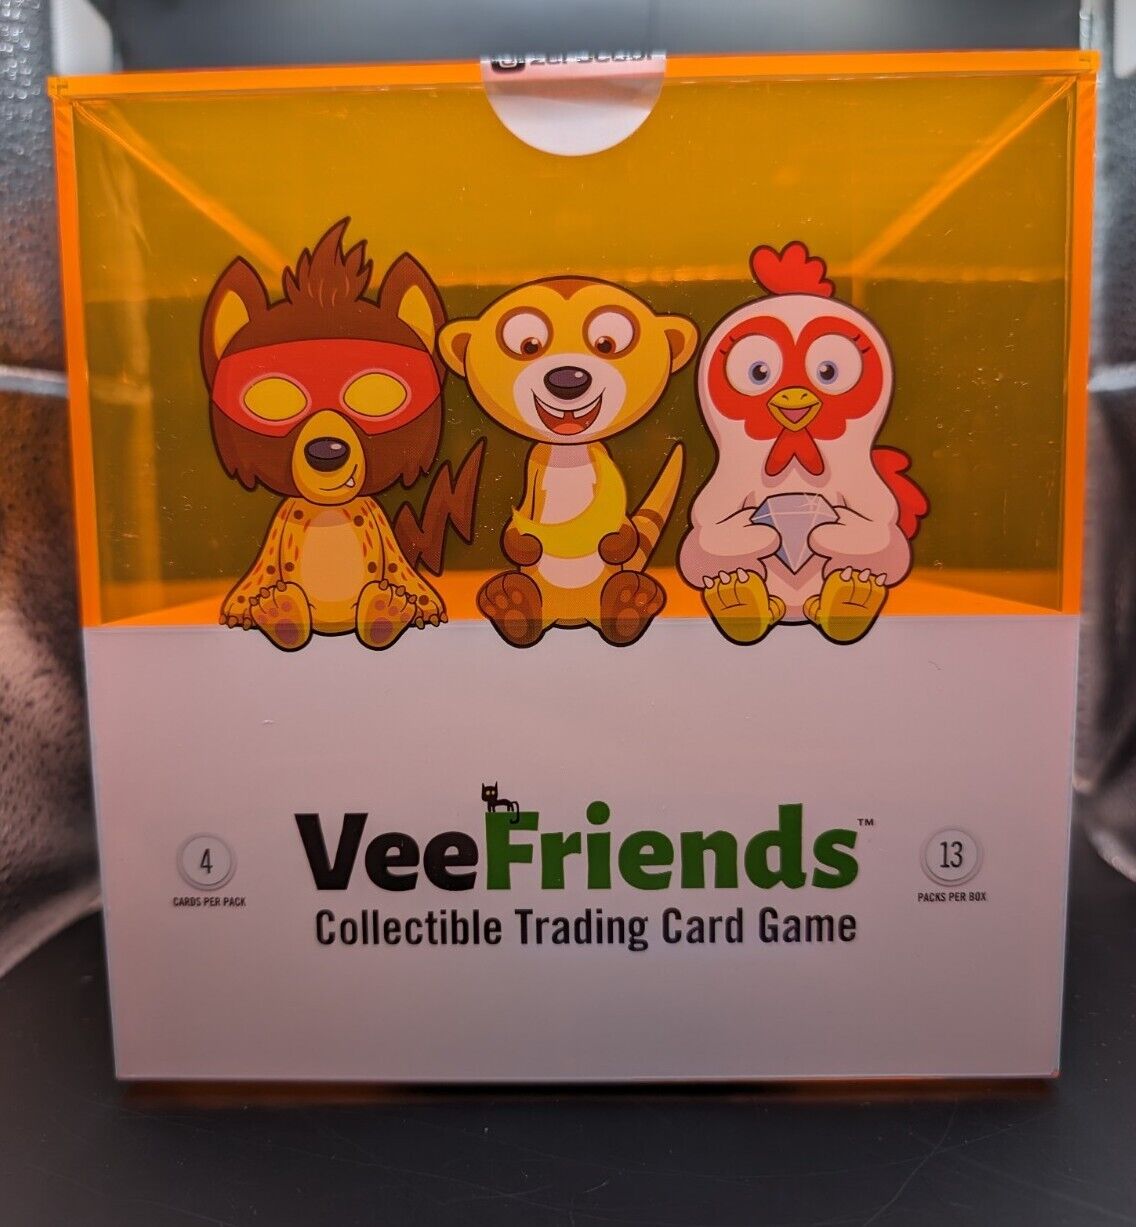 Veefriends Series 2 Compete and Collect RARE DEBUT EDITION Sealed Box (Orange)